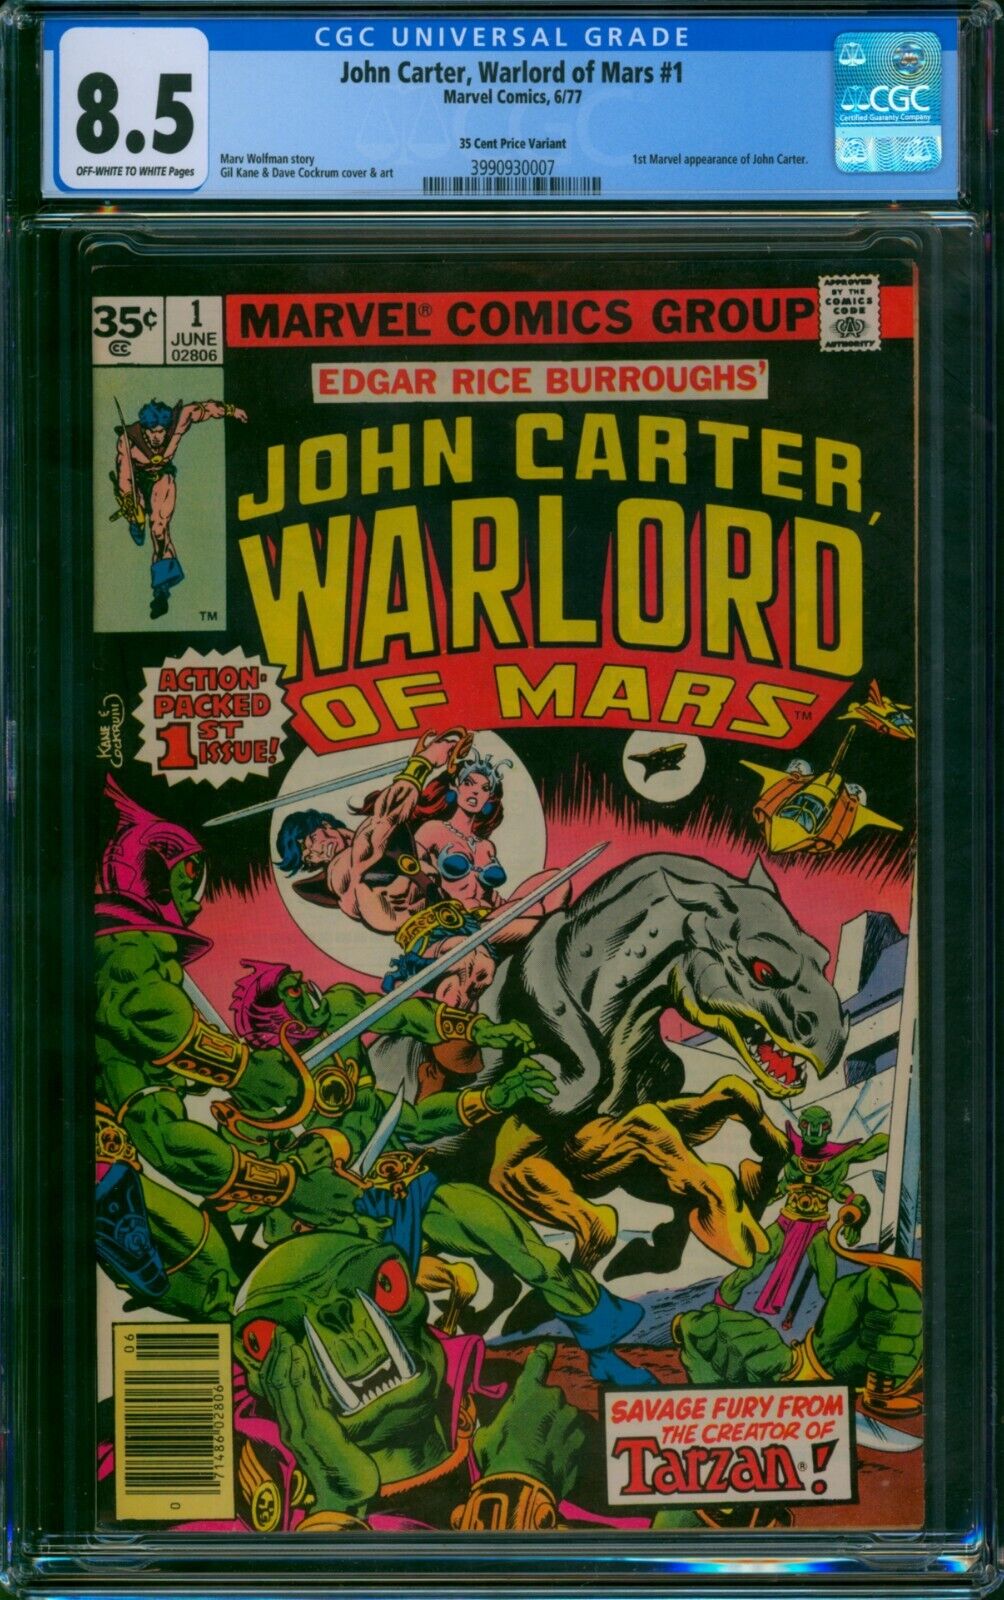 JOHN CARTER, WARLORD OF MARS #1 ⭐ 35 CENT PRICE VARIANT ⭐ CGC 8.5 Marvel 1977